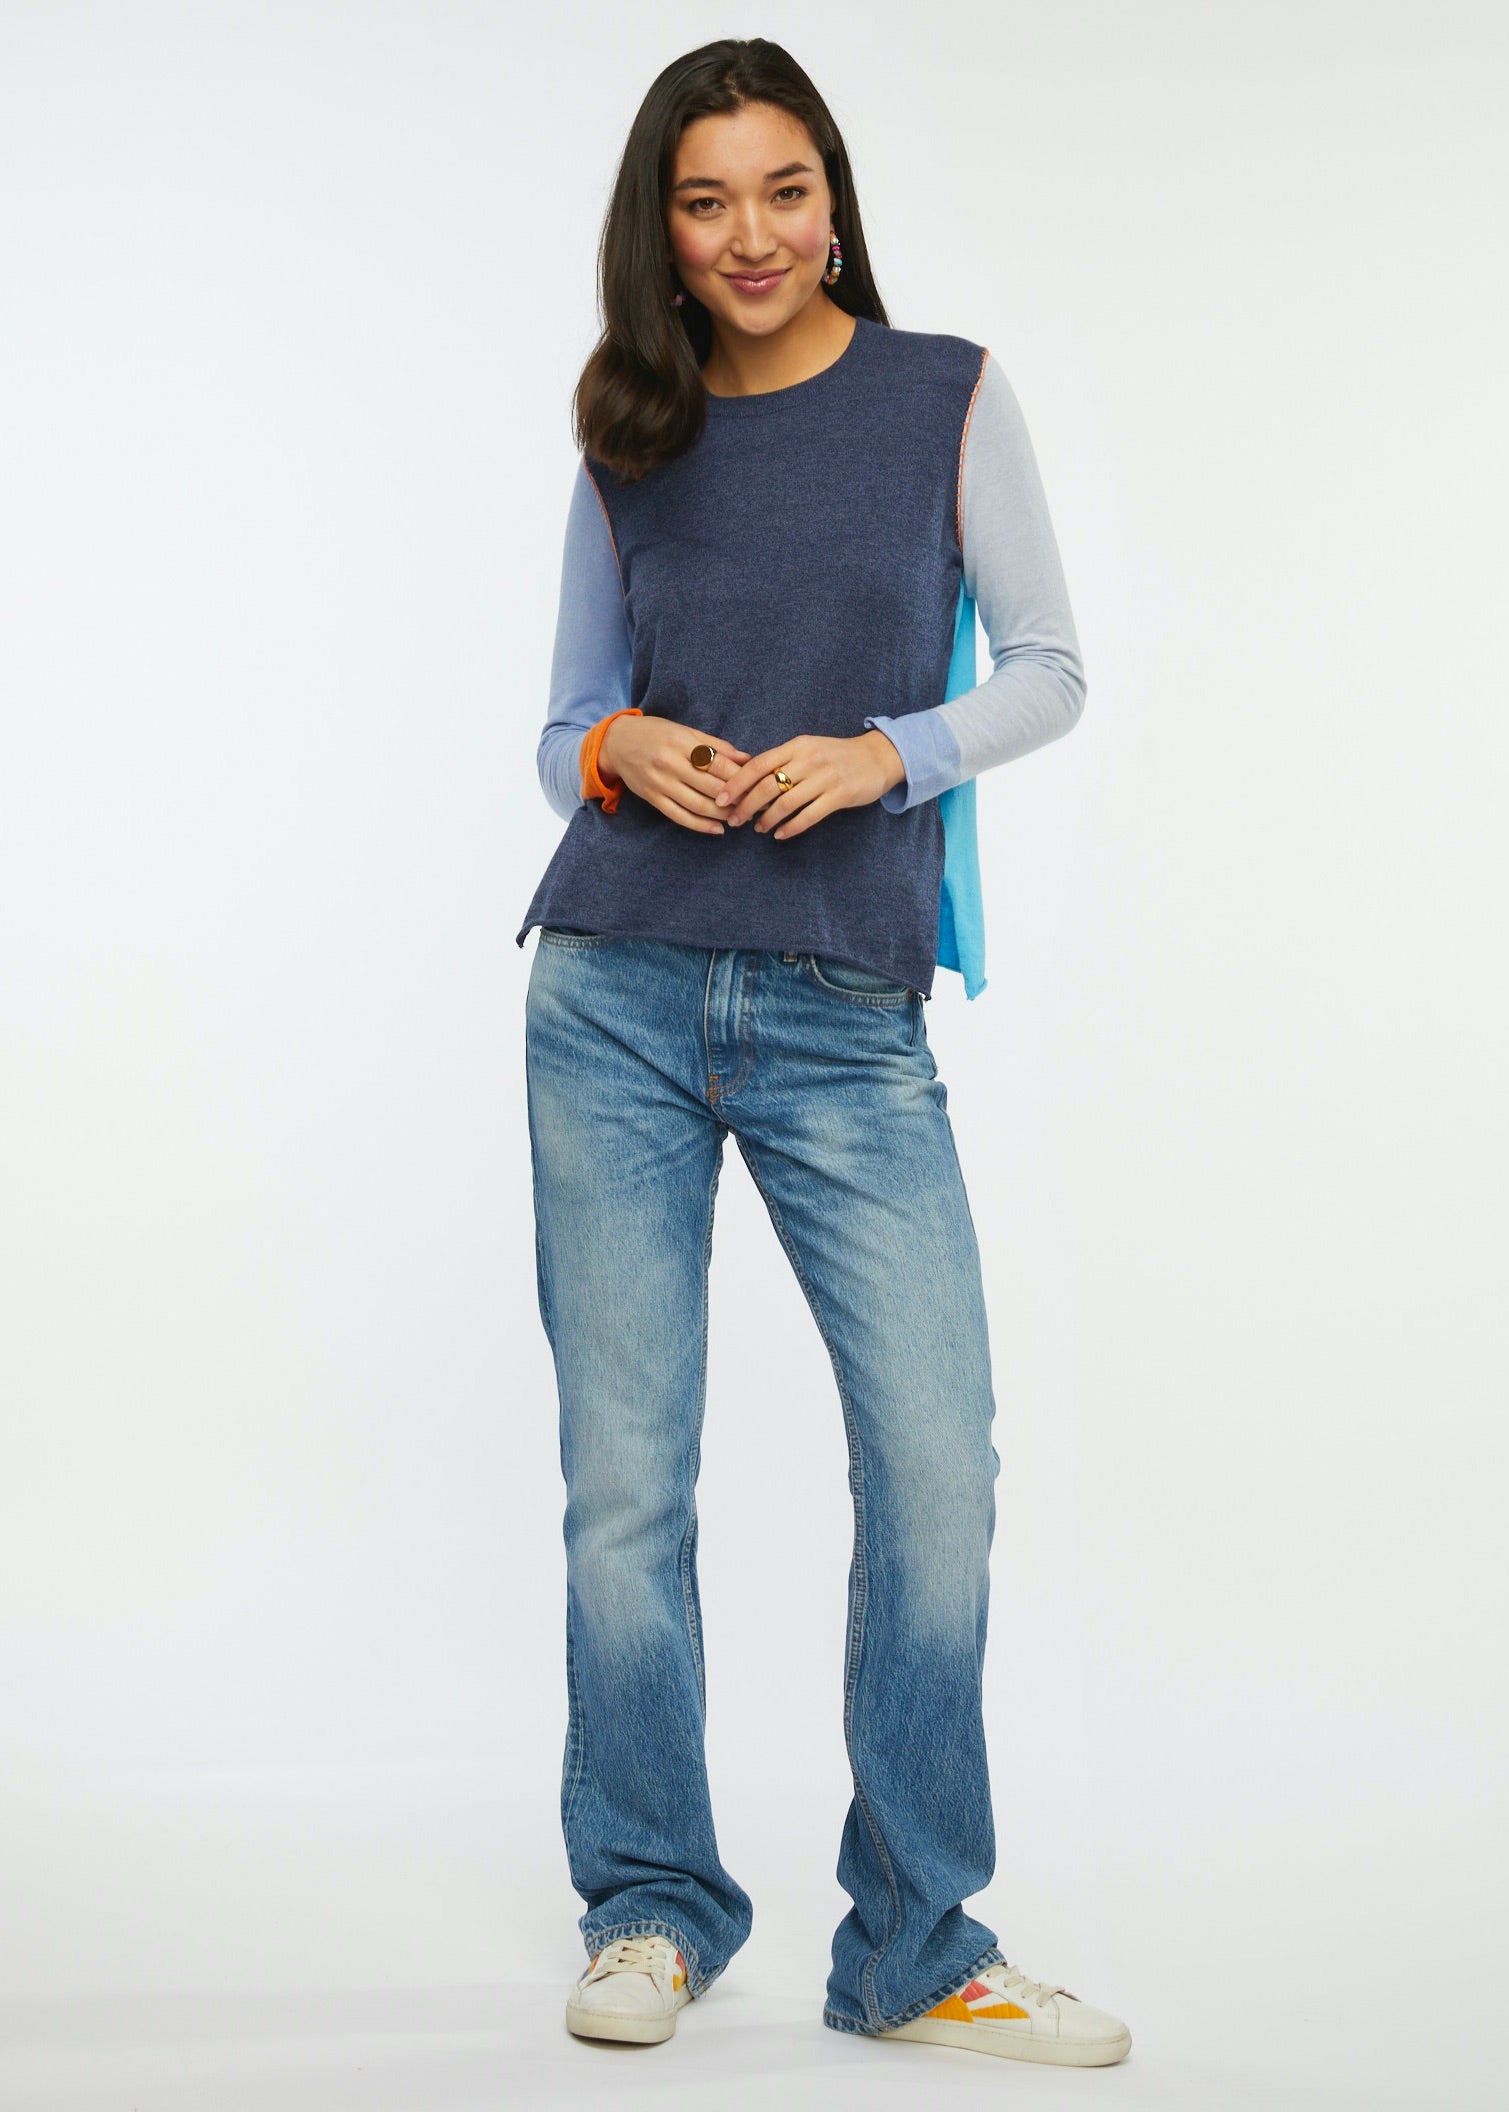 Color Block Sweater by Zaket & Plover